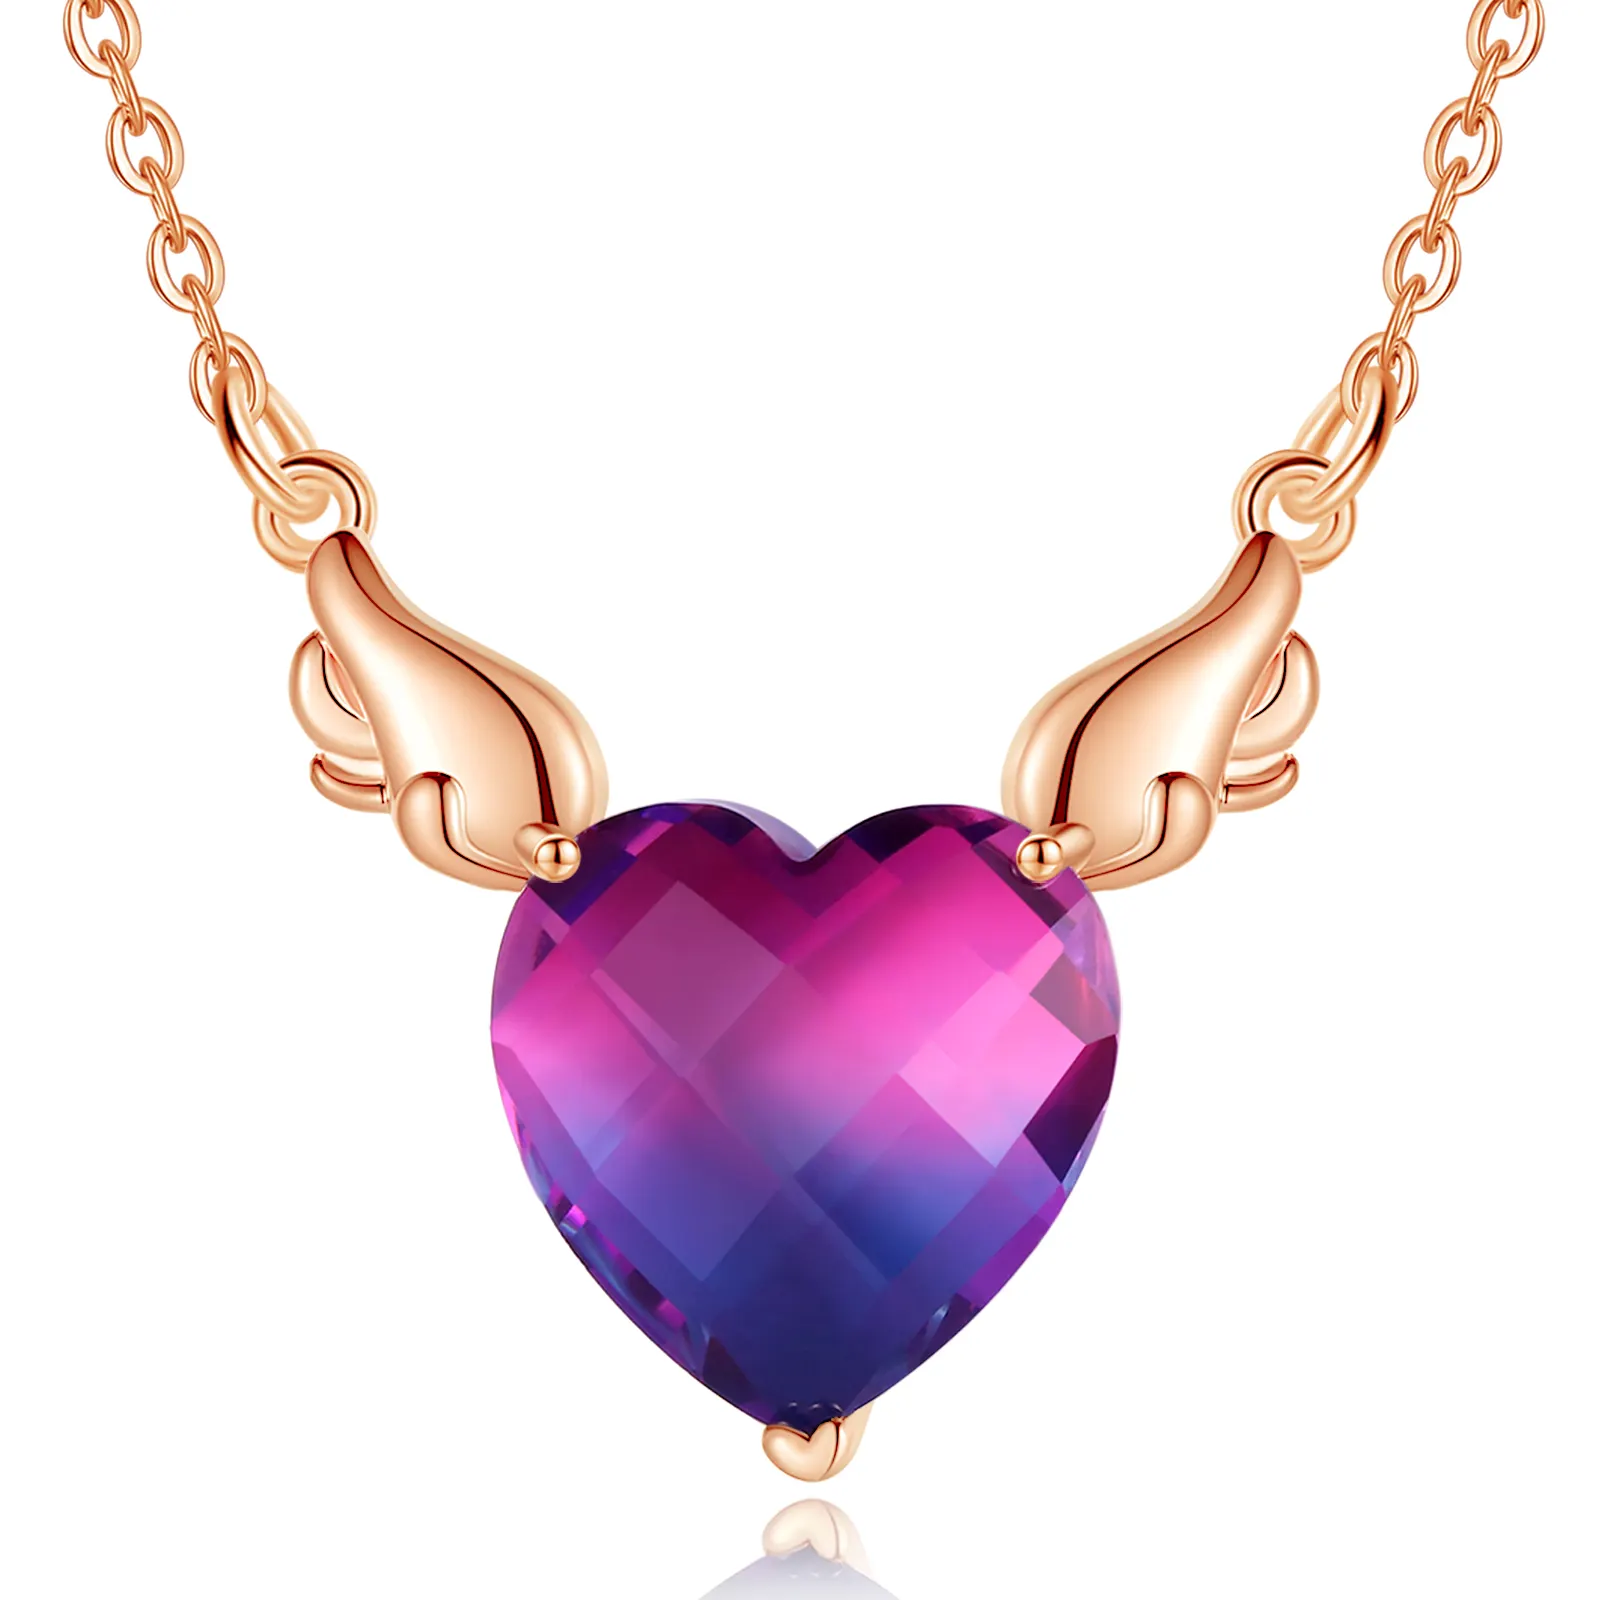 Merryshine Rose gold plated copper angel wing love heart shape blue crystal pendant necklace